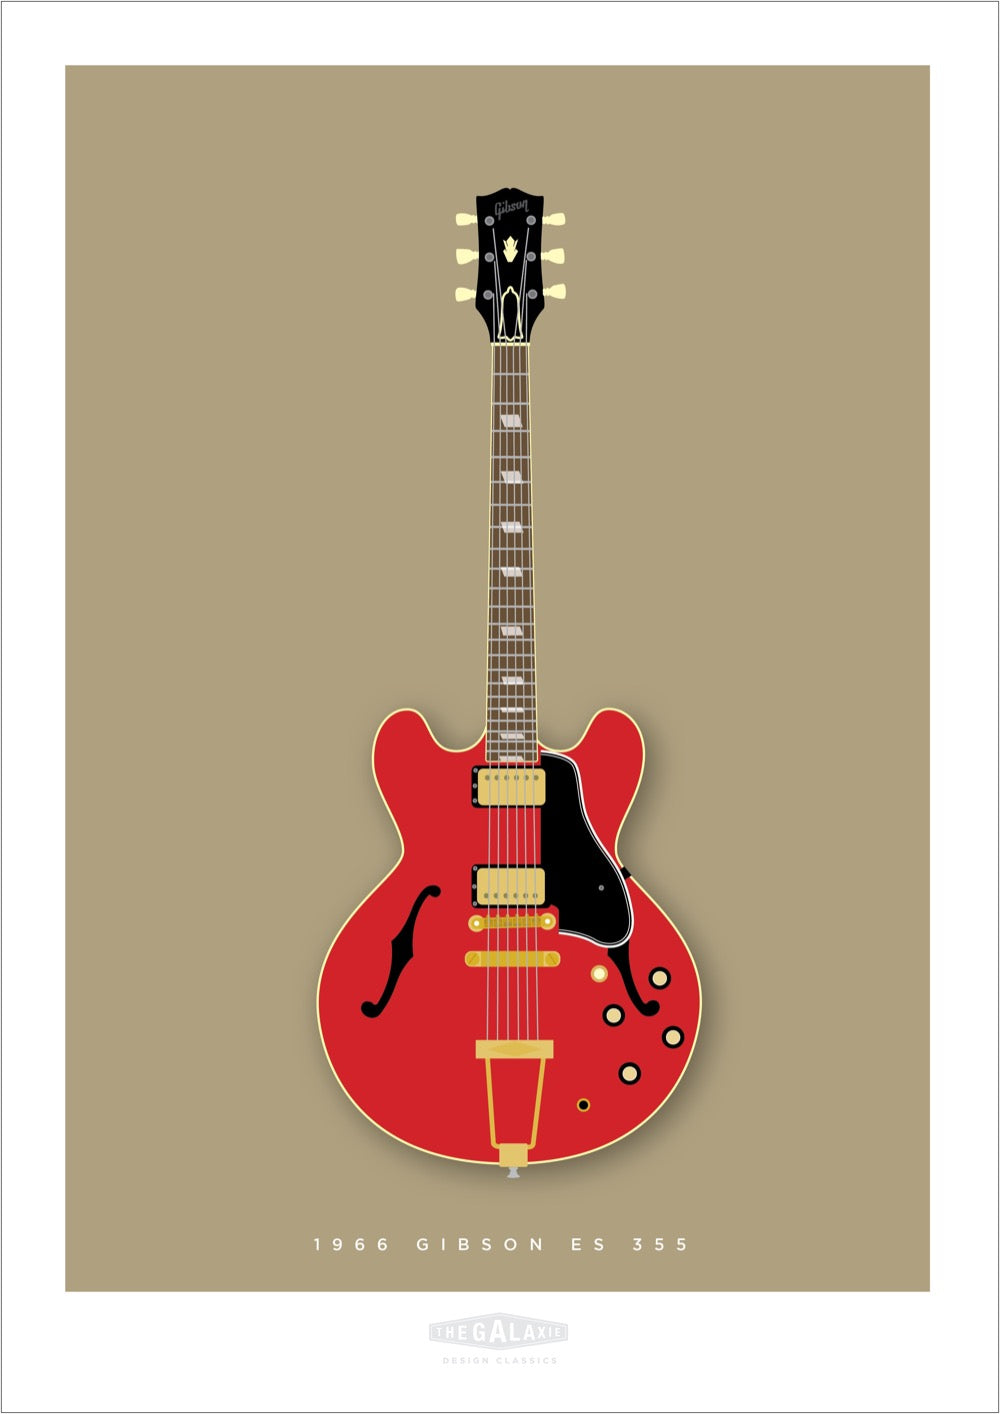 An original hand drawn poster of a cherry 1966 Gibson ES 355 on a tan background.